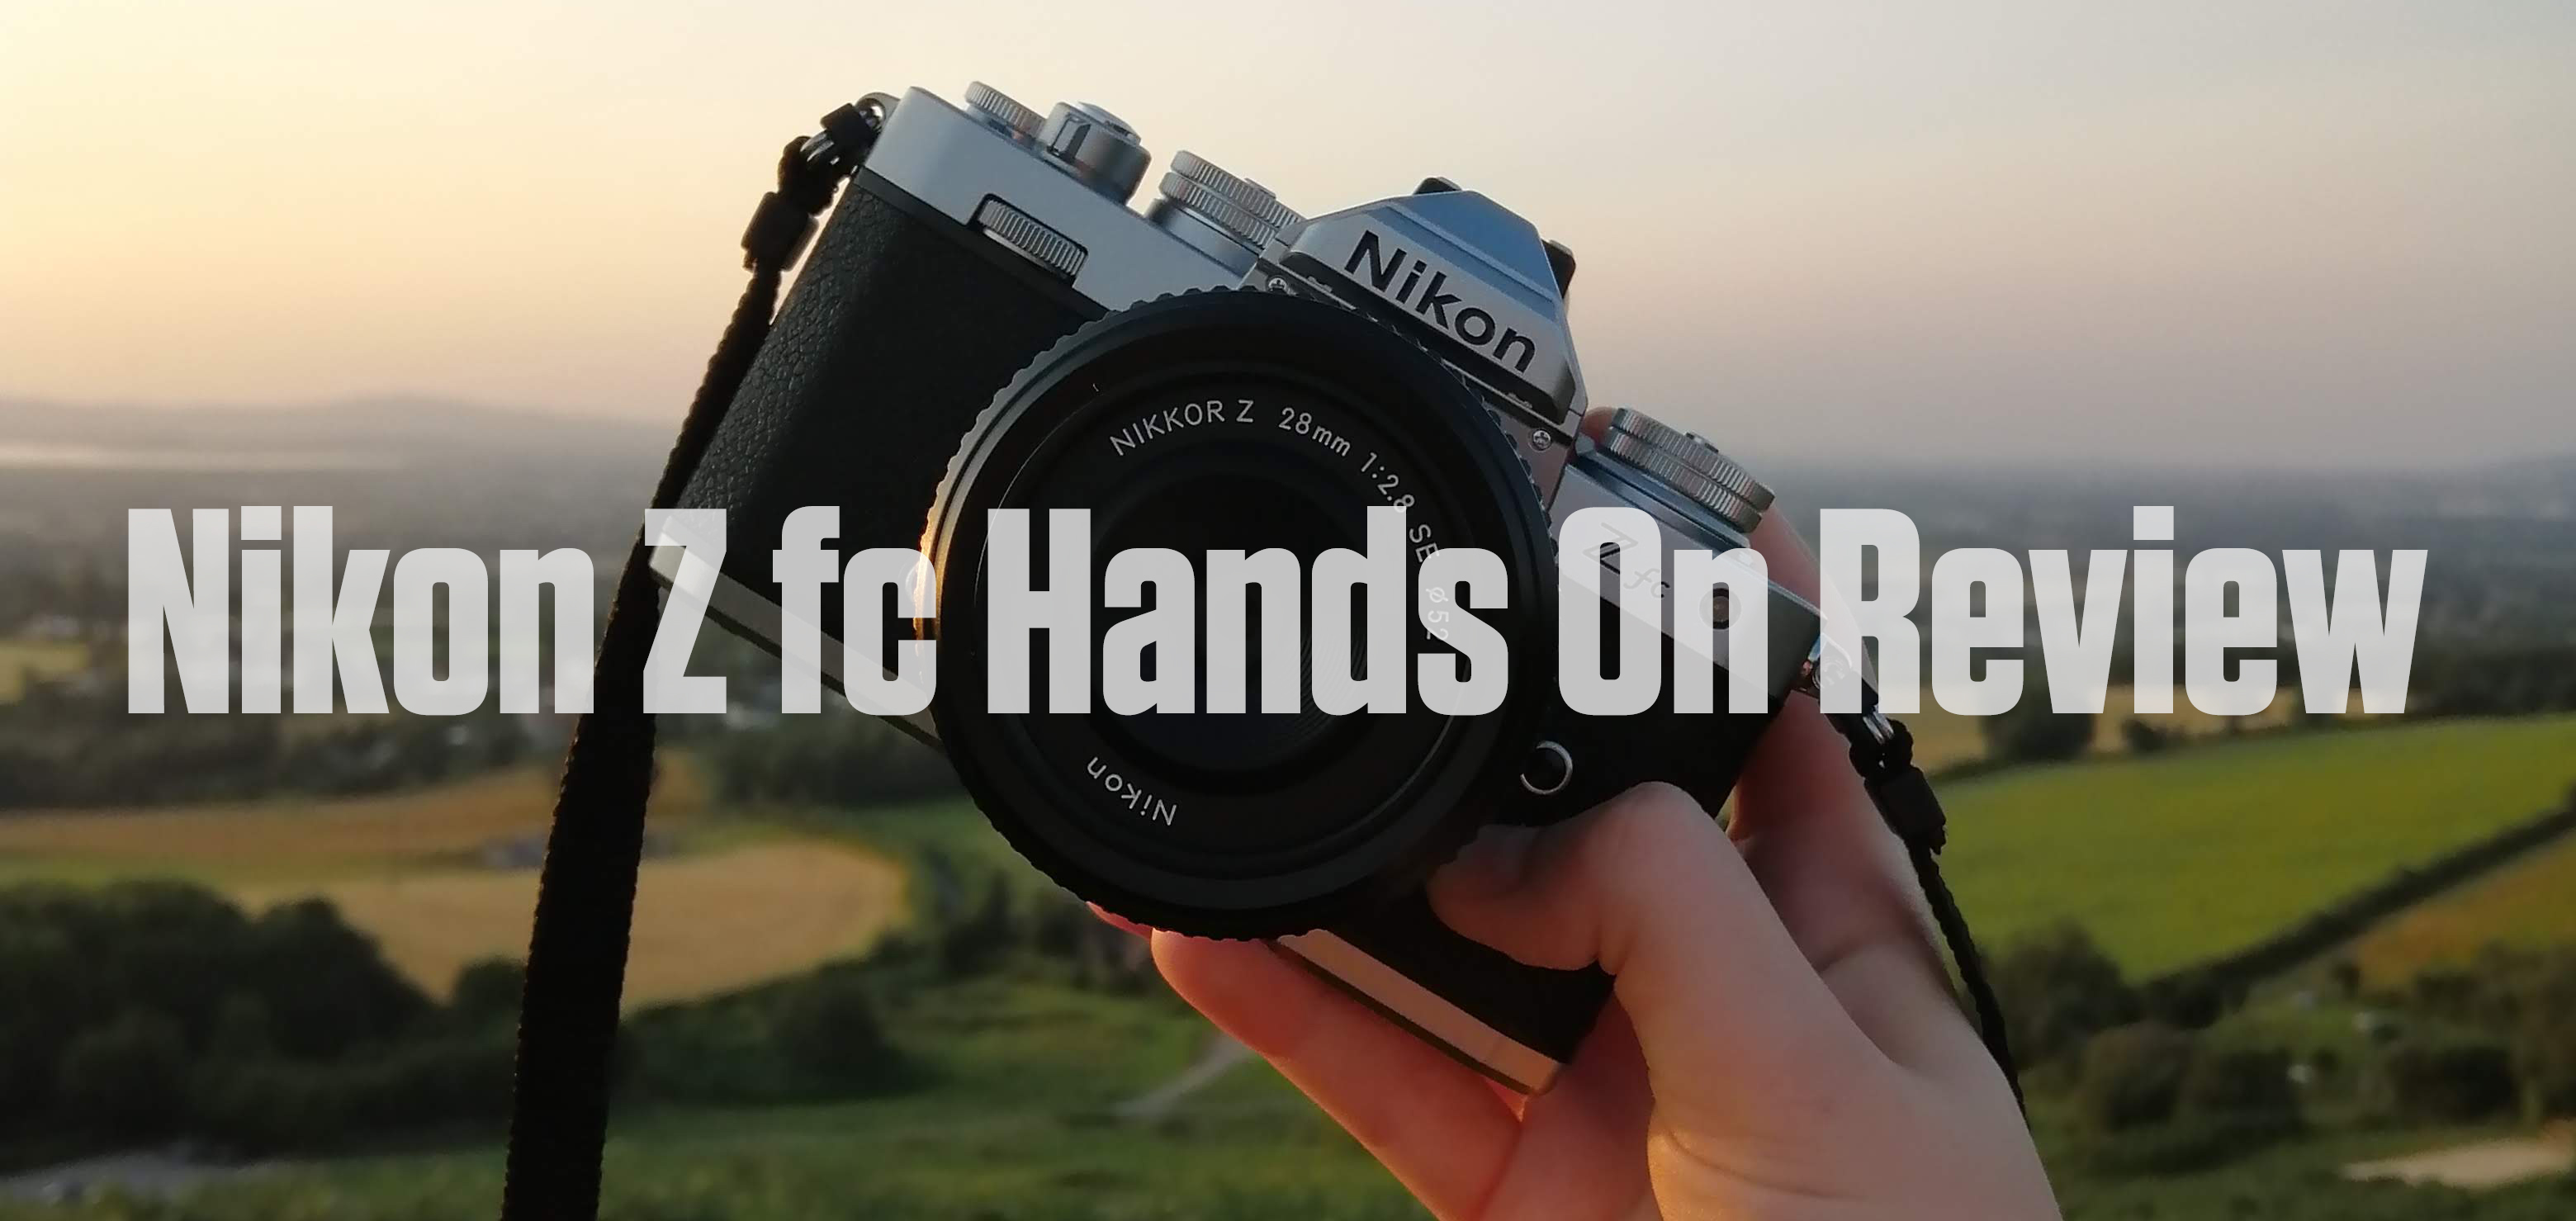 Nikon Z fc Hands On Review